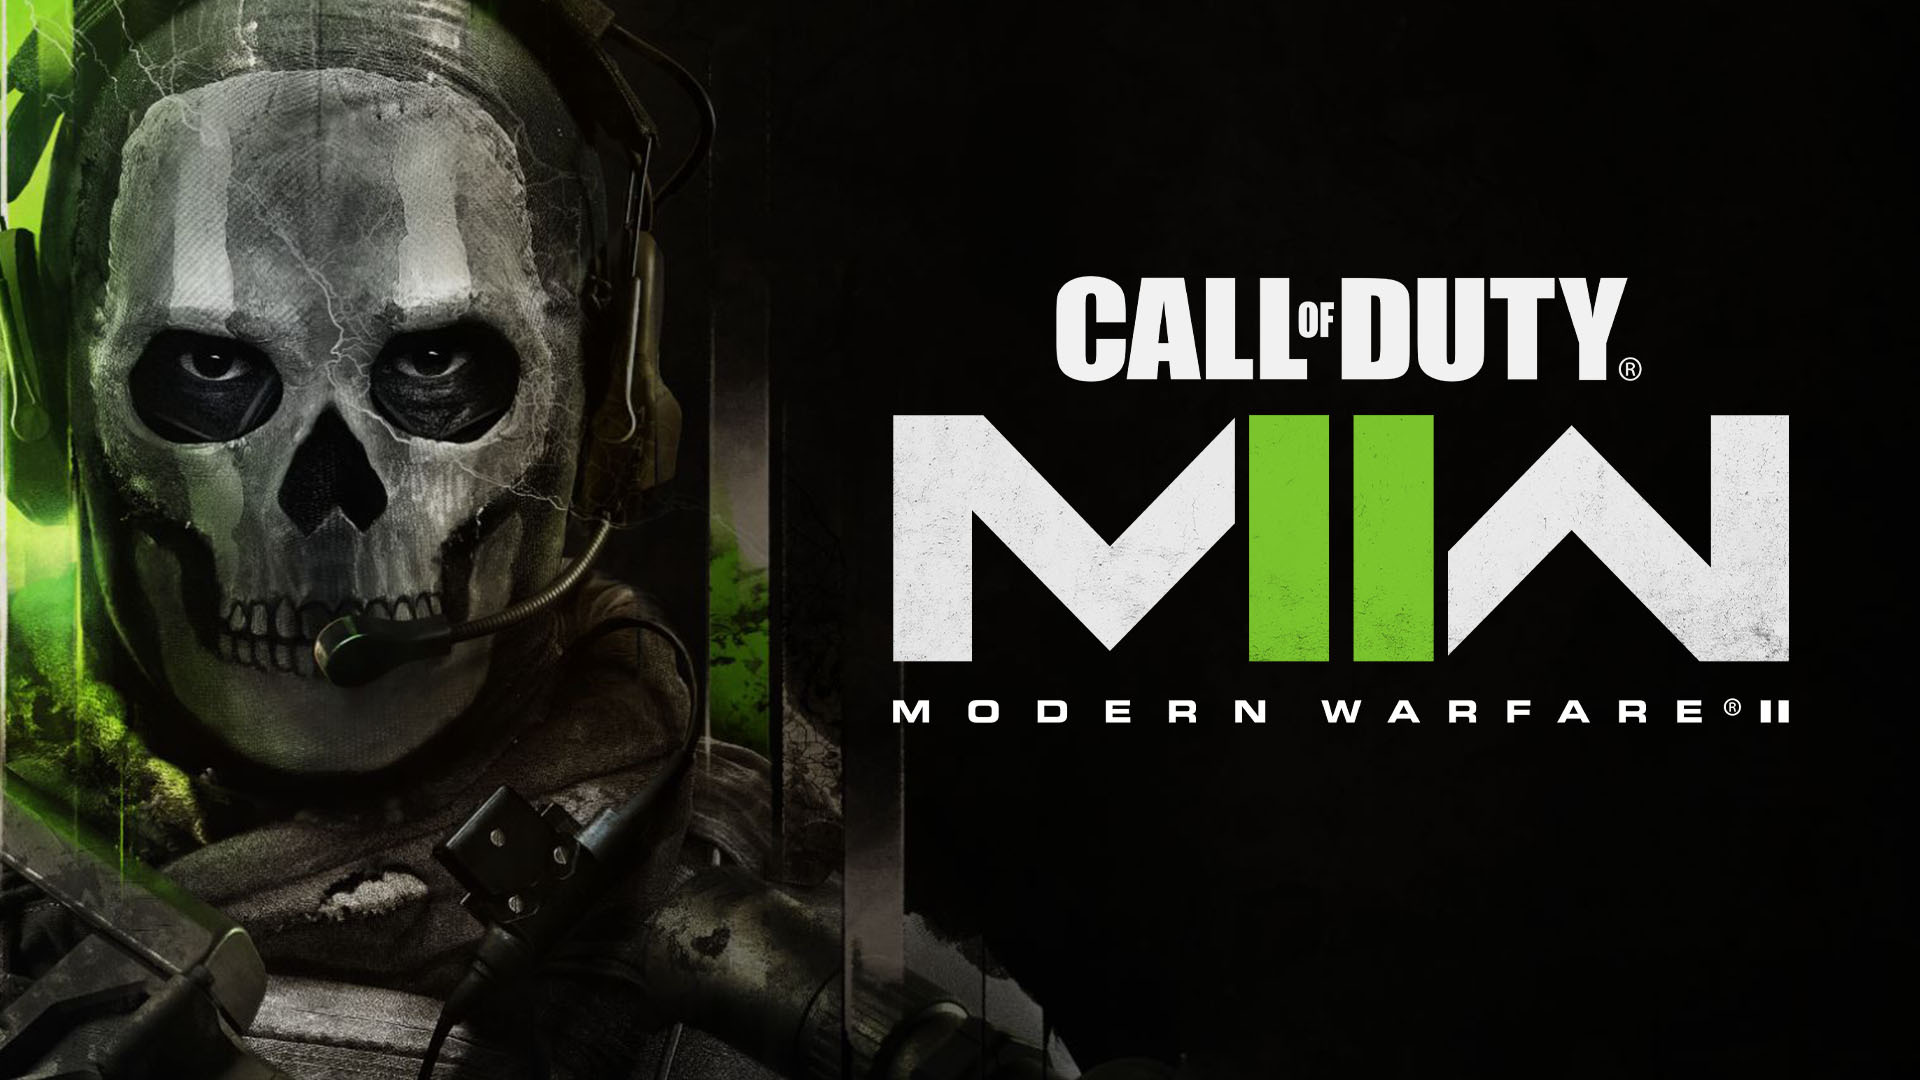 Call of Duty Modern Warfare 2 open beta date and times